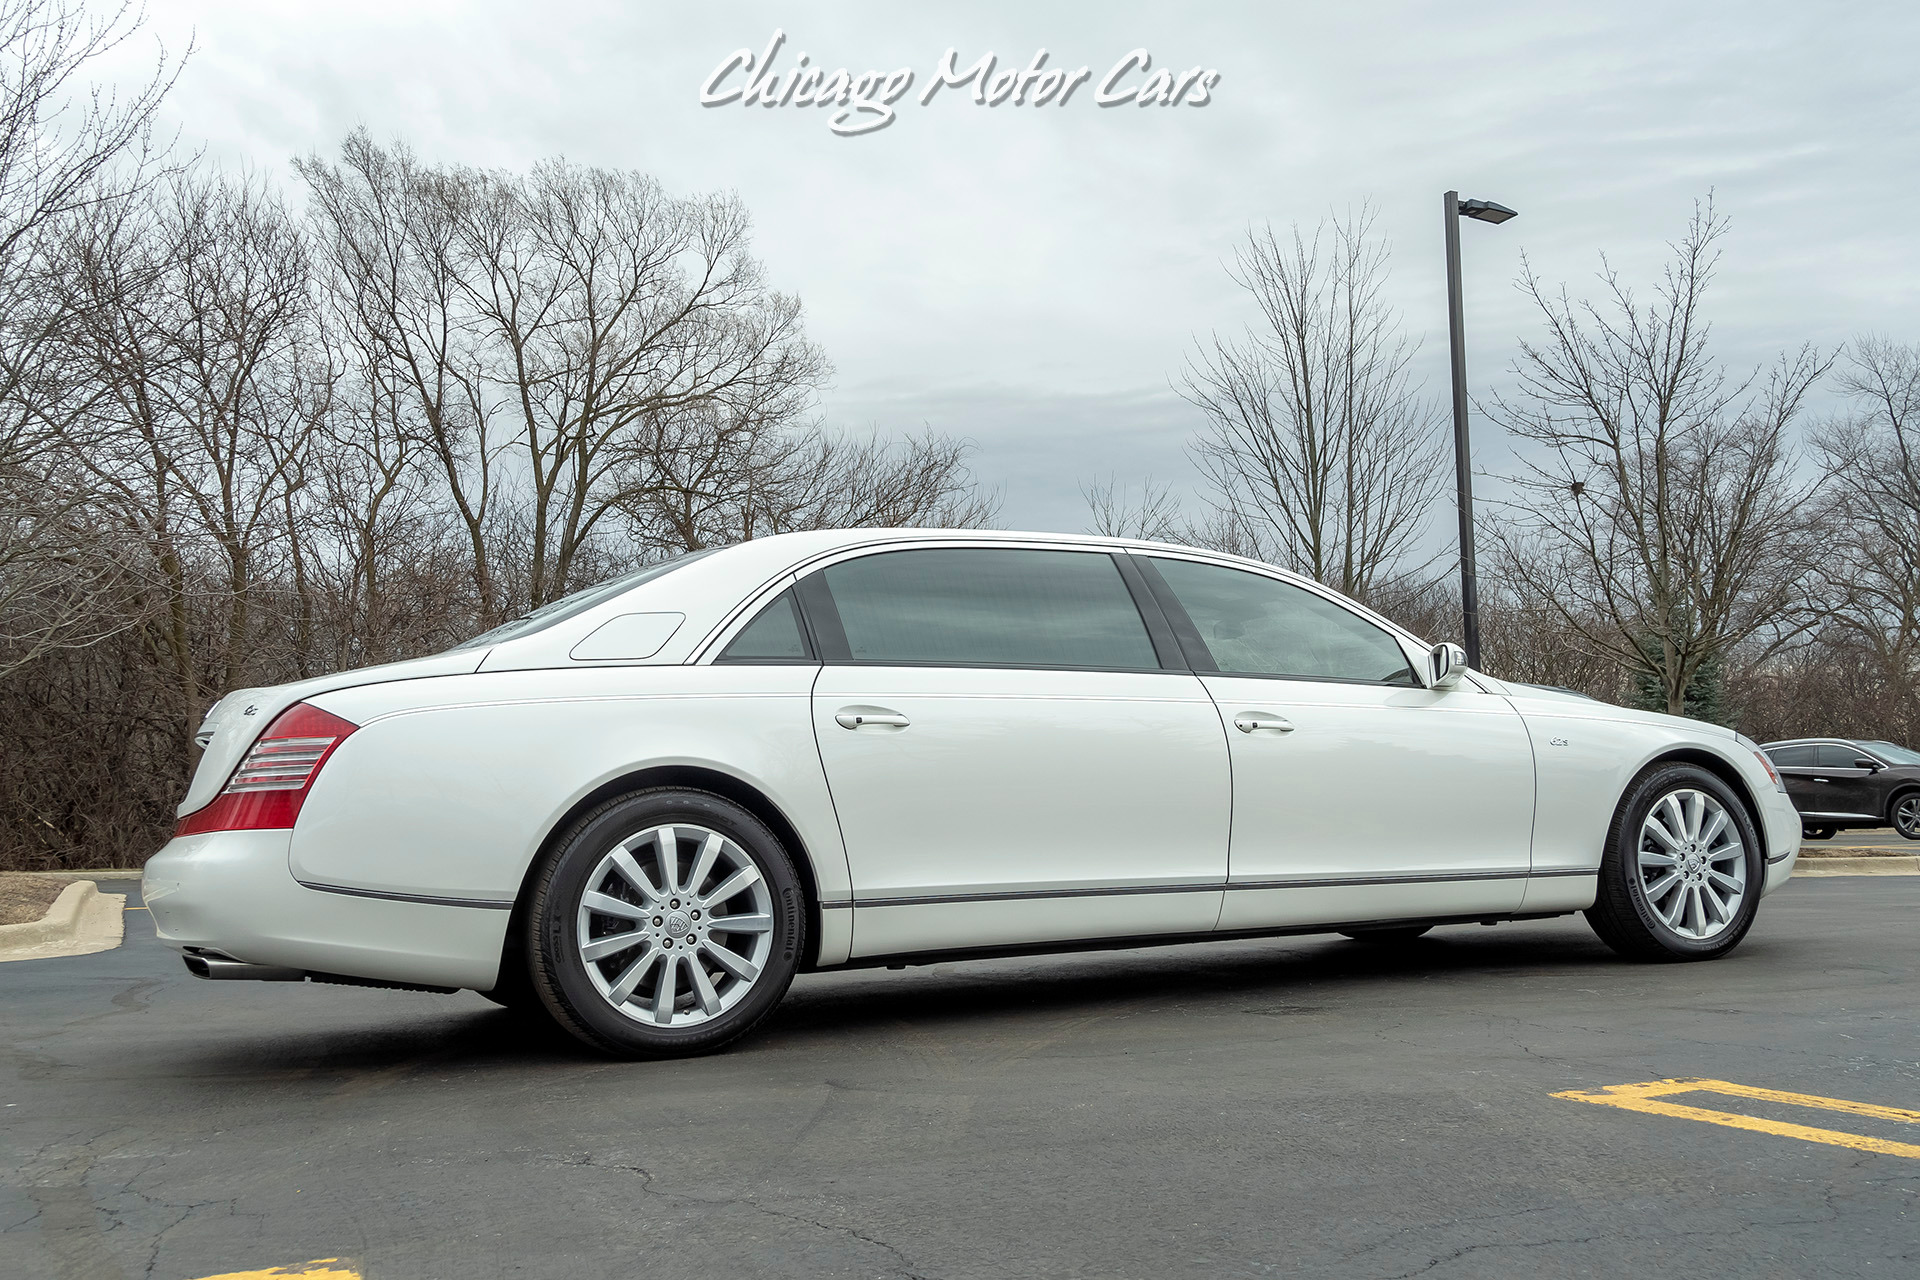 Used 2009 Maybach 62S Sedan w/Partition For Sale (Special Pricing) |  Chicago Motor Cars Stock #16840